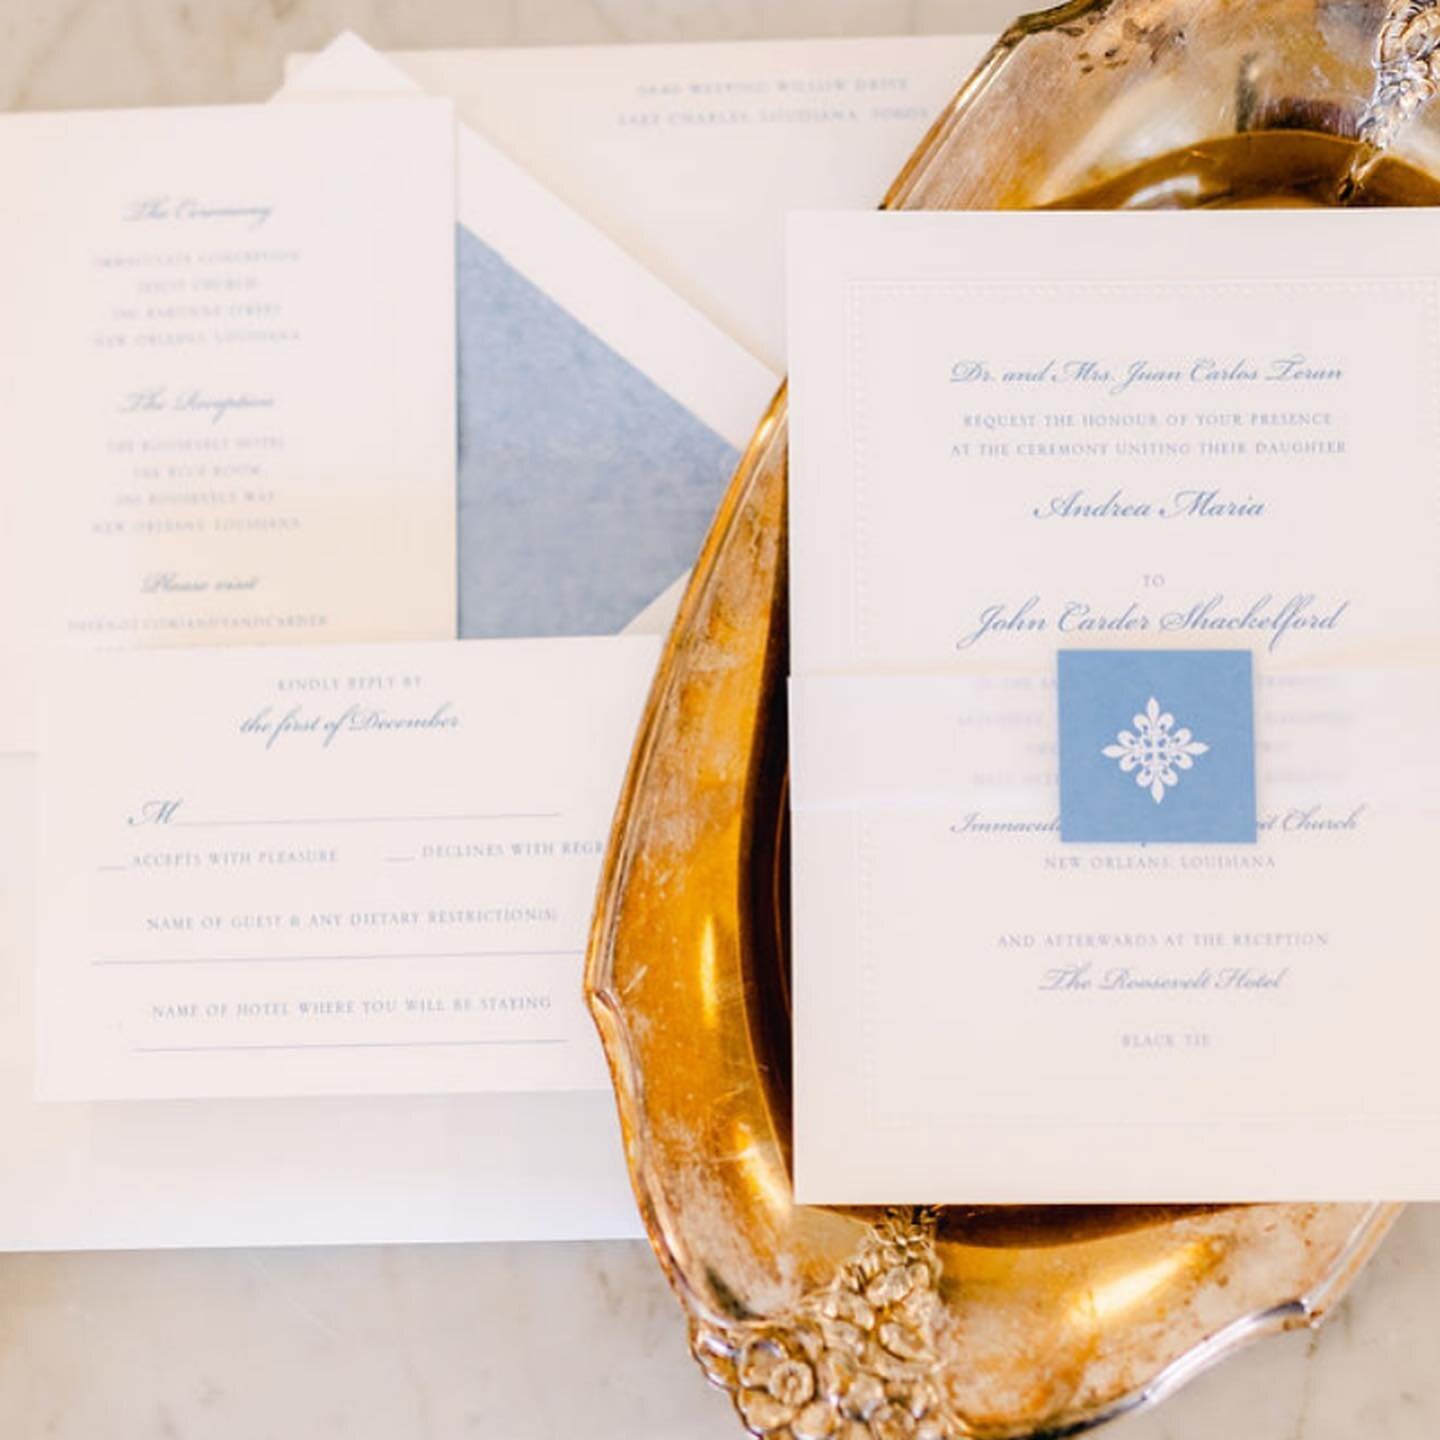 Last wedding of 2022 &amp; she was a stunner! Thermography, embossed border on all cards, delicate tissue envelope liners, &amp; vellum belly bands with embellishment. 

We've been working with this bride for nearly an entire year! We started with Sa